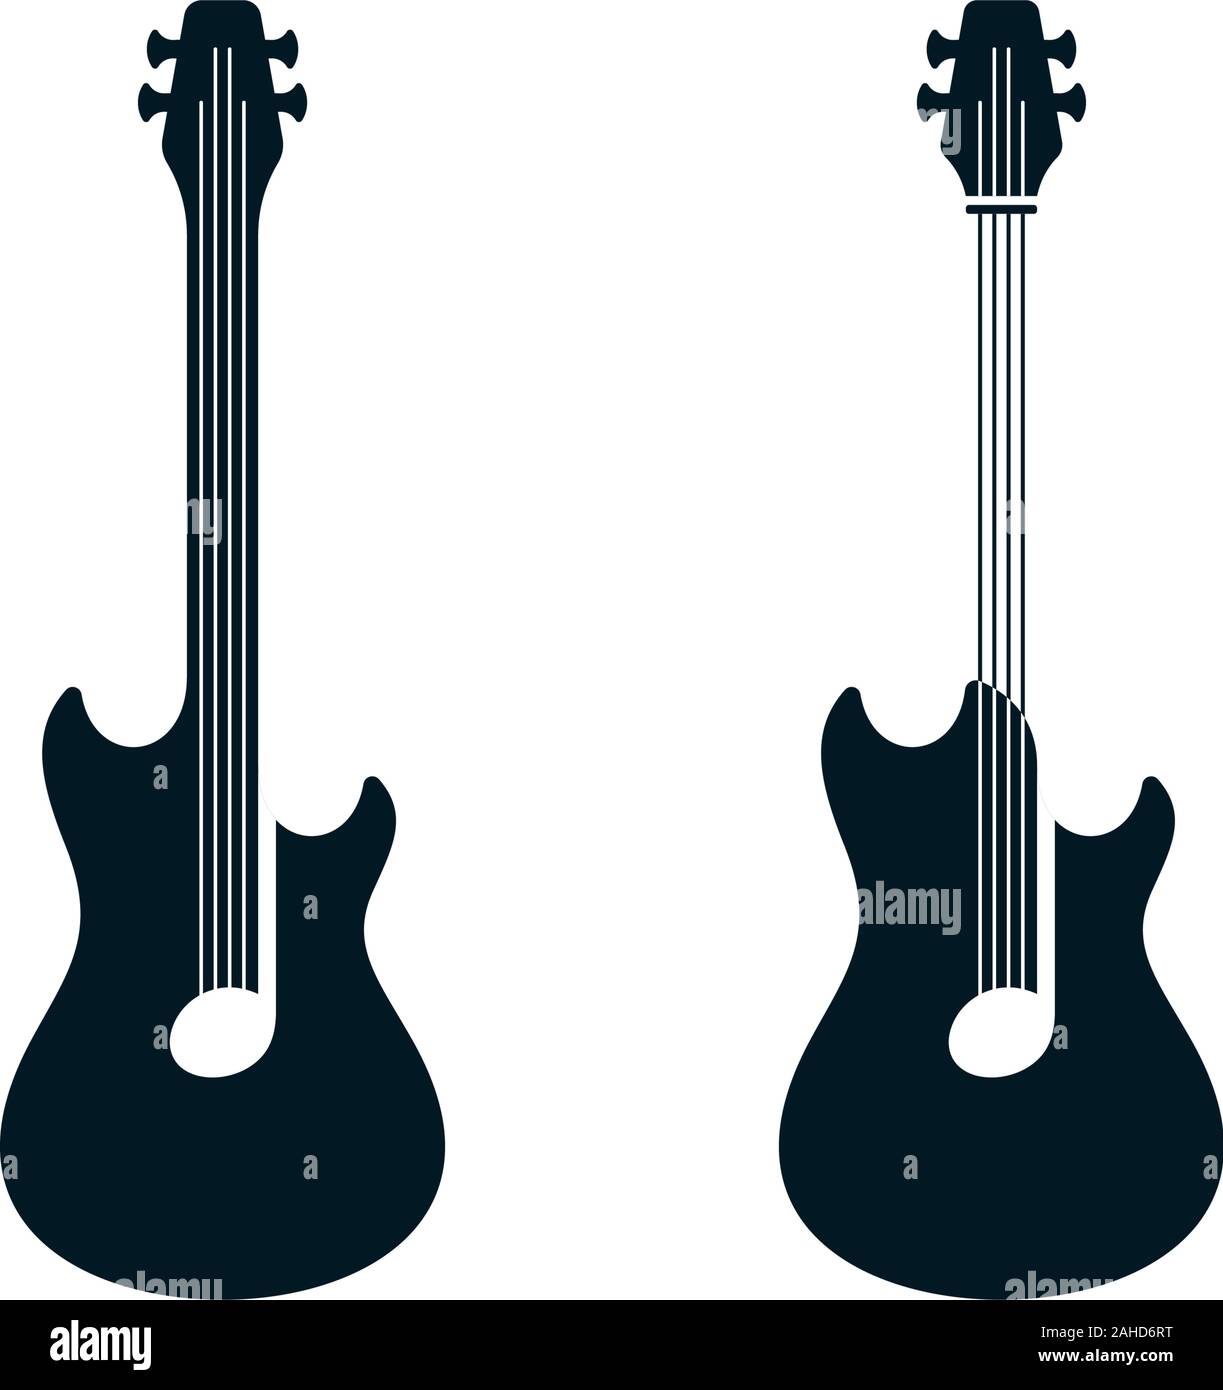 Guitar symbols with notes. Musical instruments icon design. Stock Vector